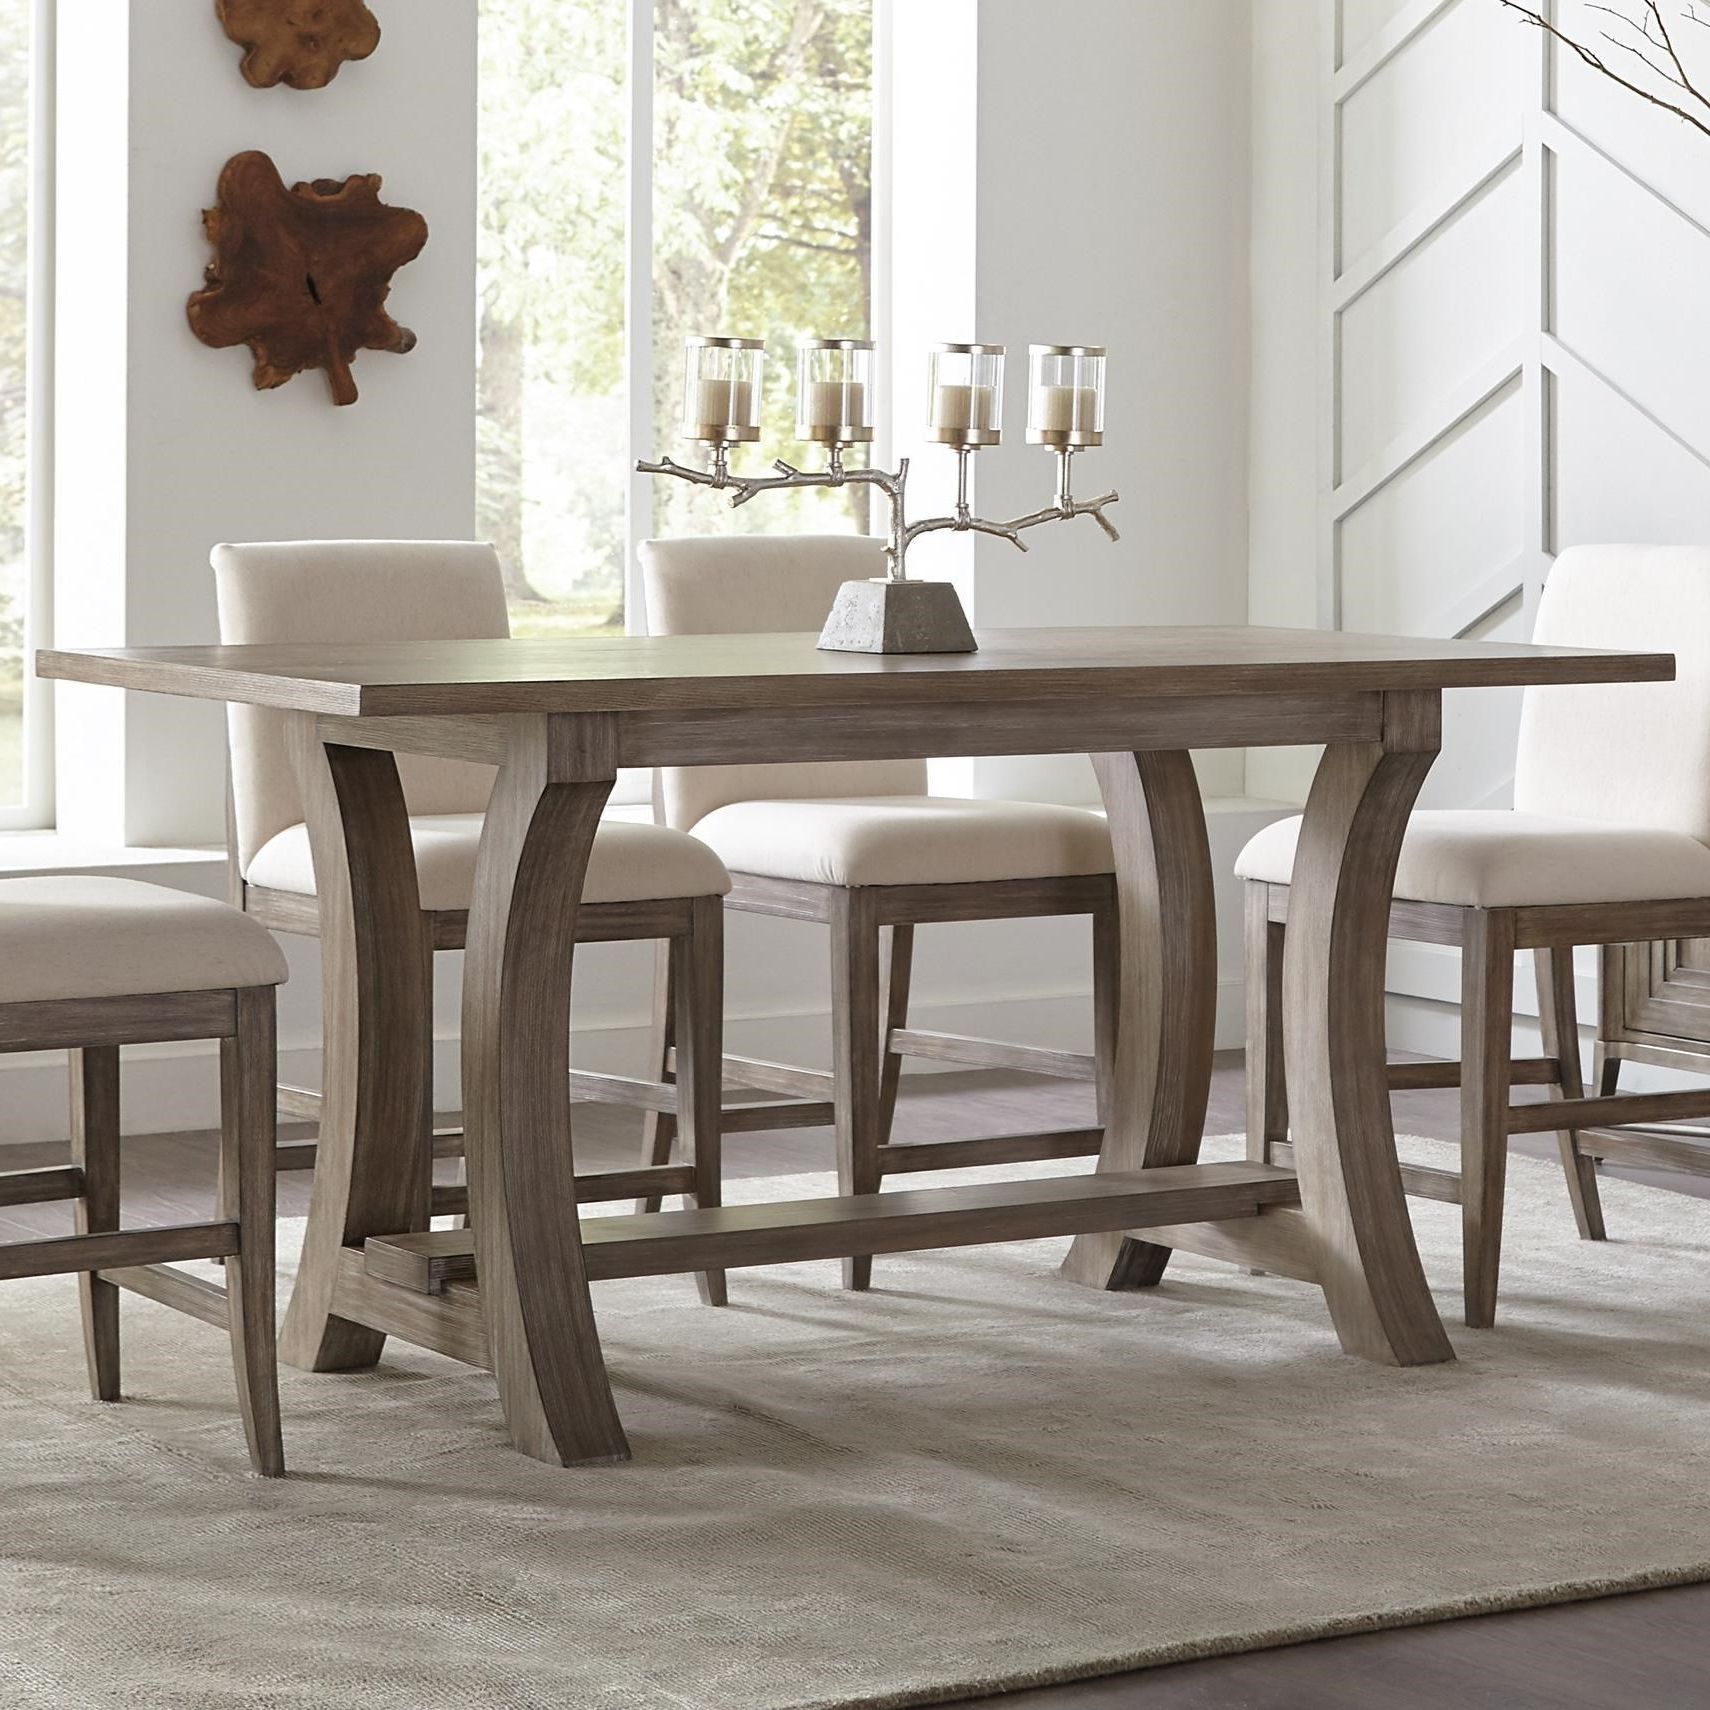 Charterville Counter Height Pedestal Dining Tables Pertaining To Most Up To Date Riverside Furniture Sophie 50346 76 Inch Counter Height (View 5 of 20)